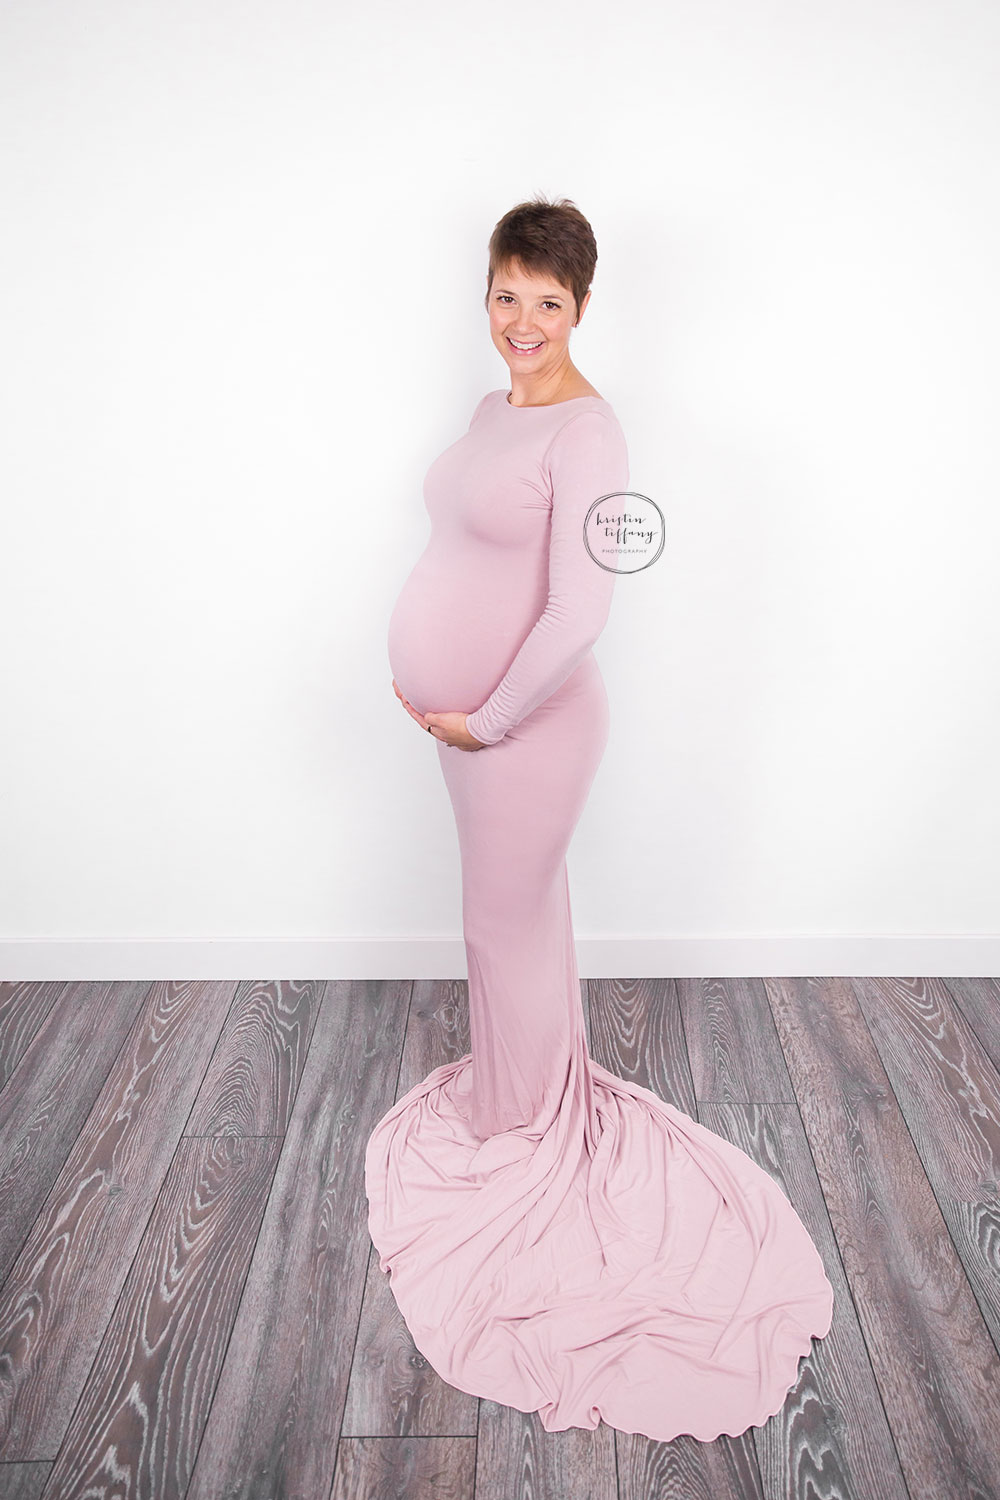 a maternity photo with a woman in a pink gown